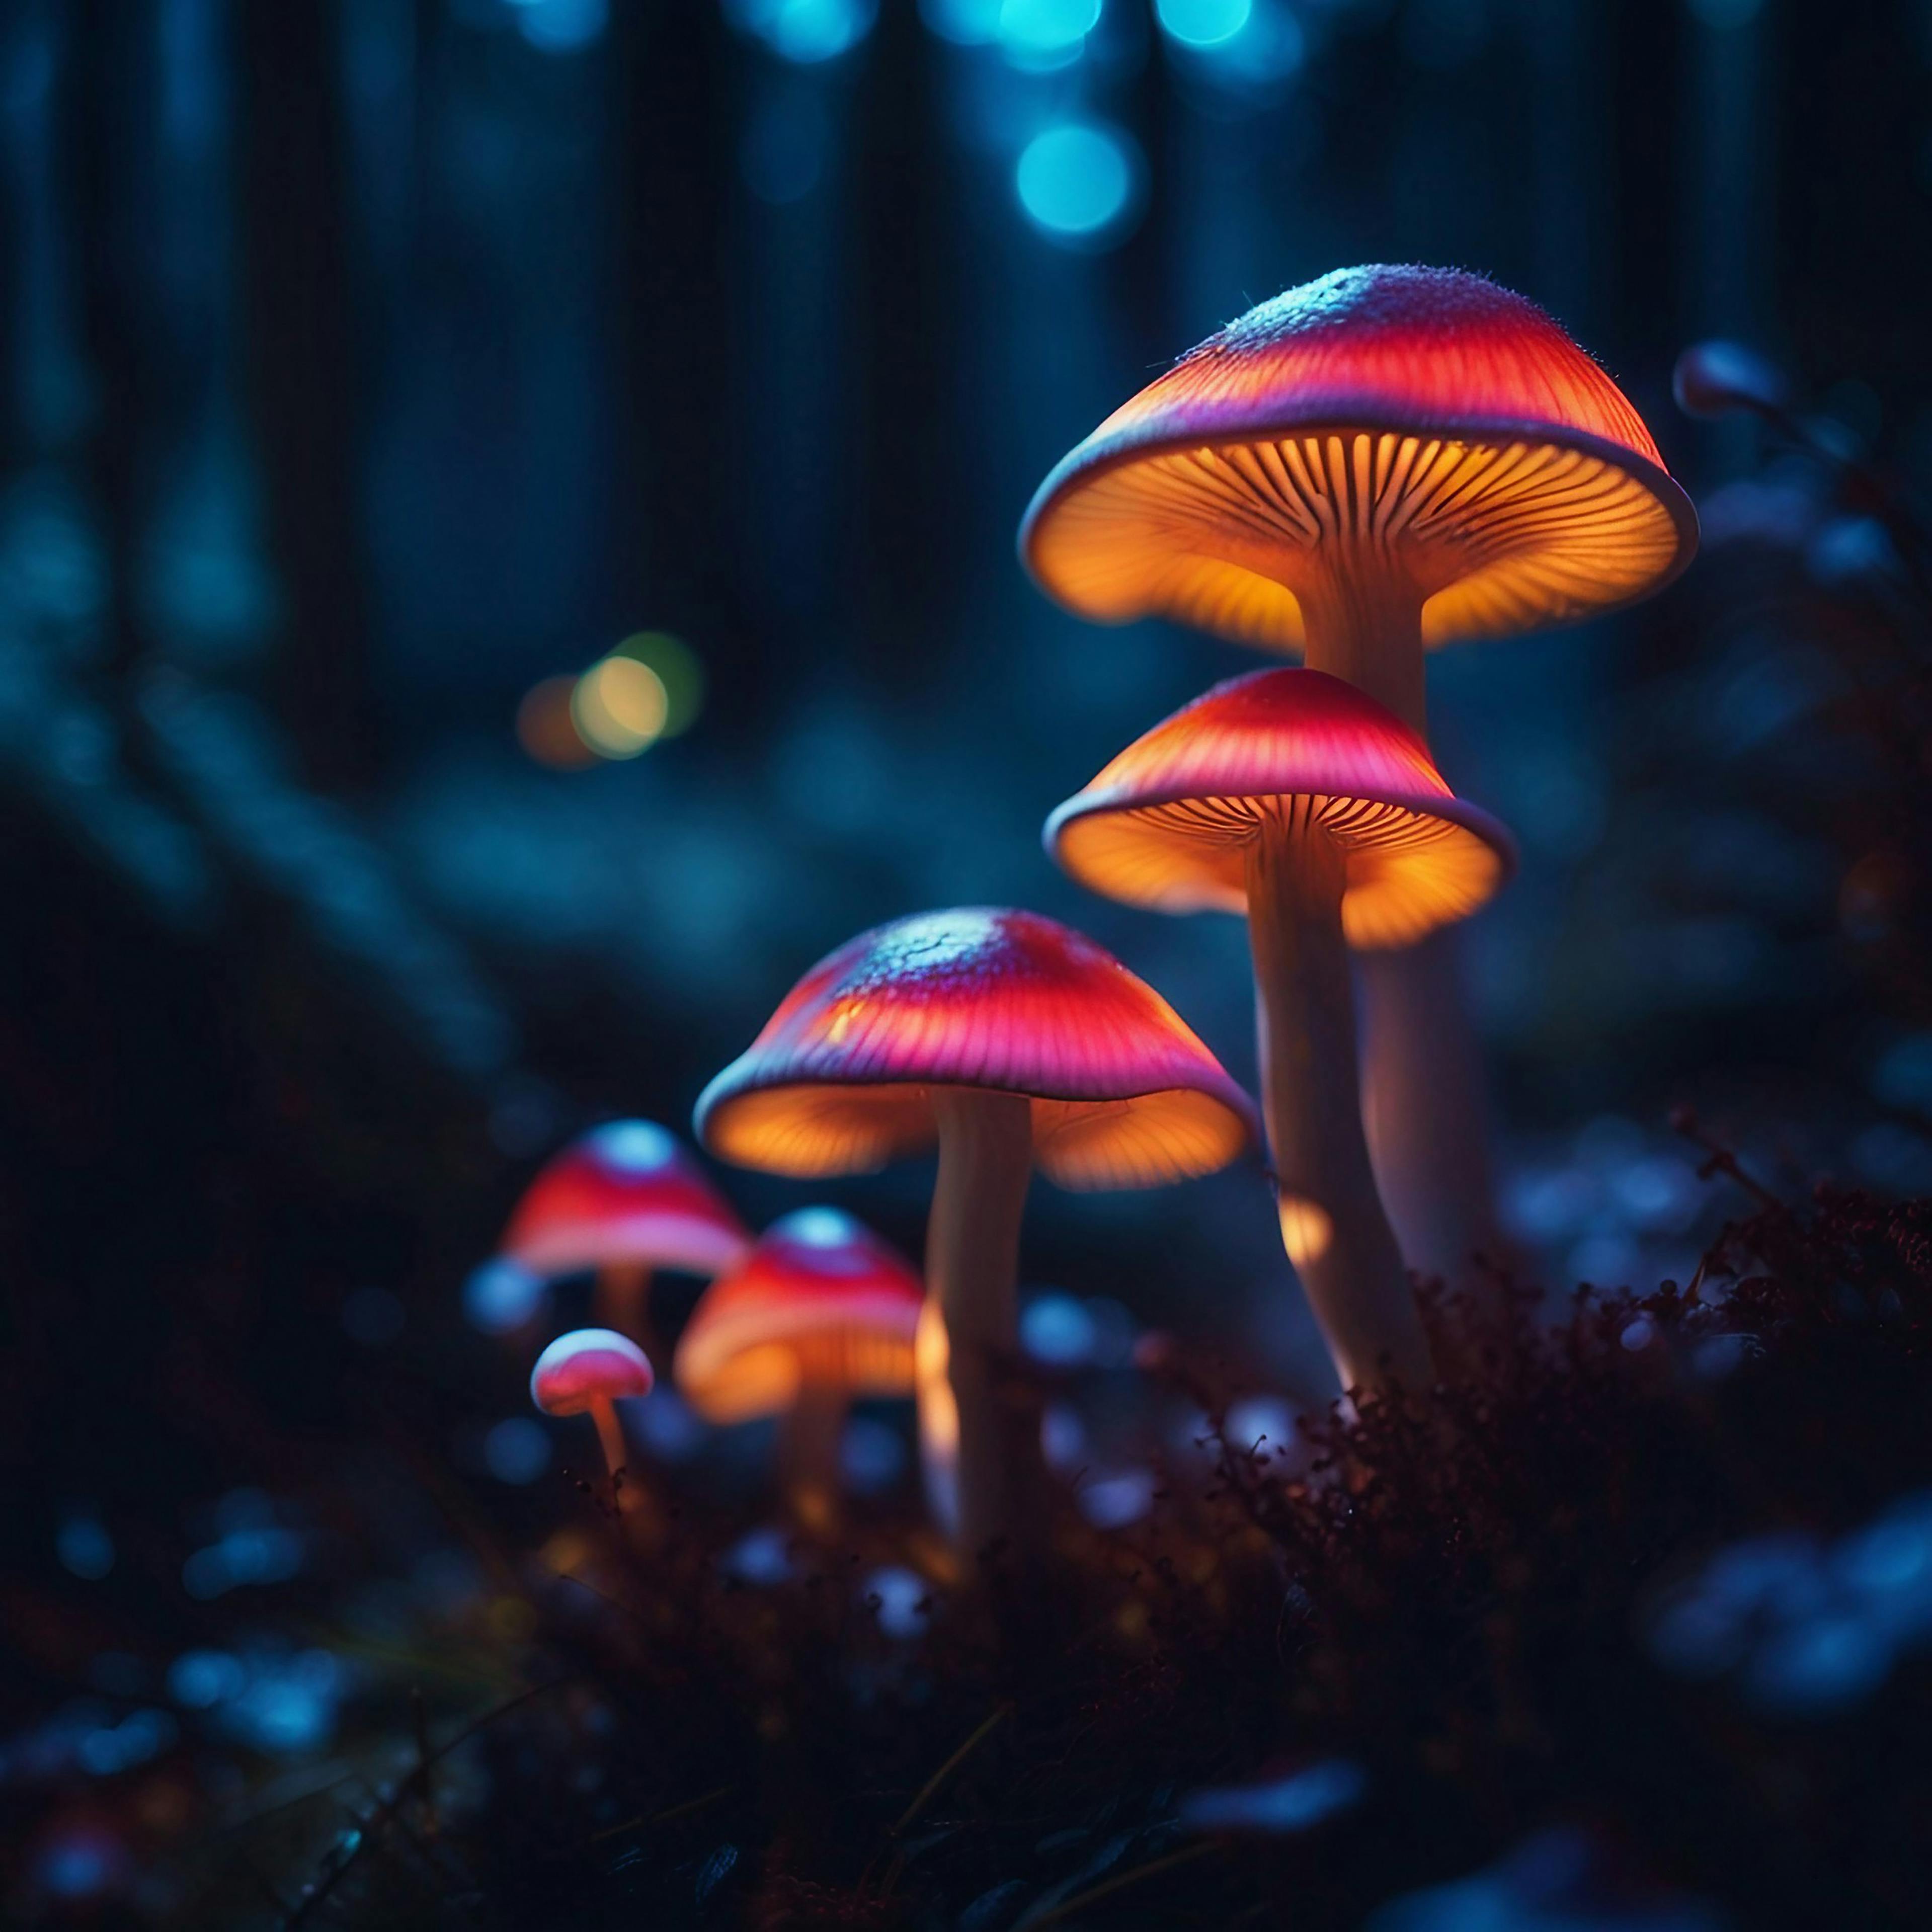 Image of glowing mushrooms in forest at twilight, created by artificial intelligence. Stock image. | Image Credit: © tuncelik81 - stock.adobe.com